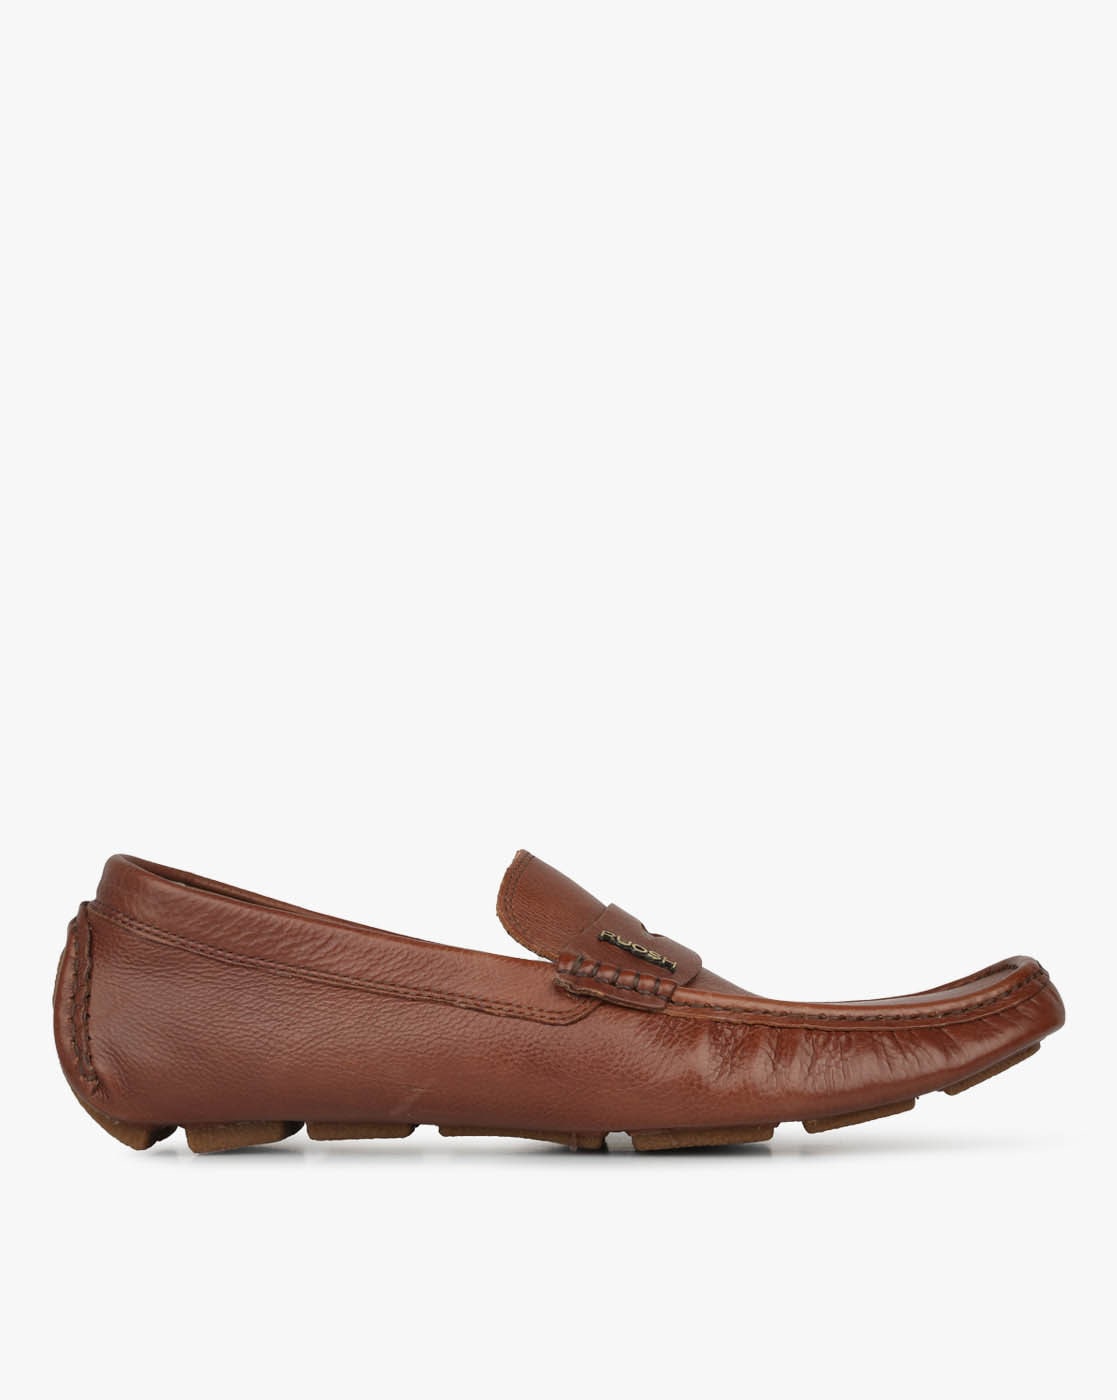 ruosh loafers online india